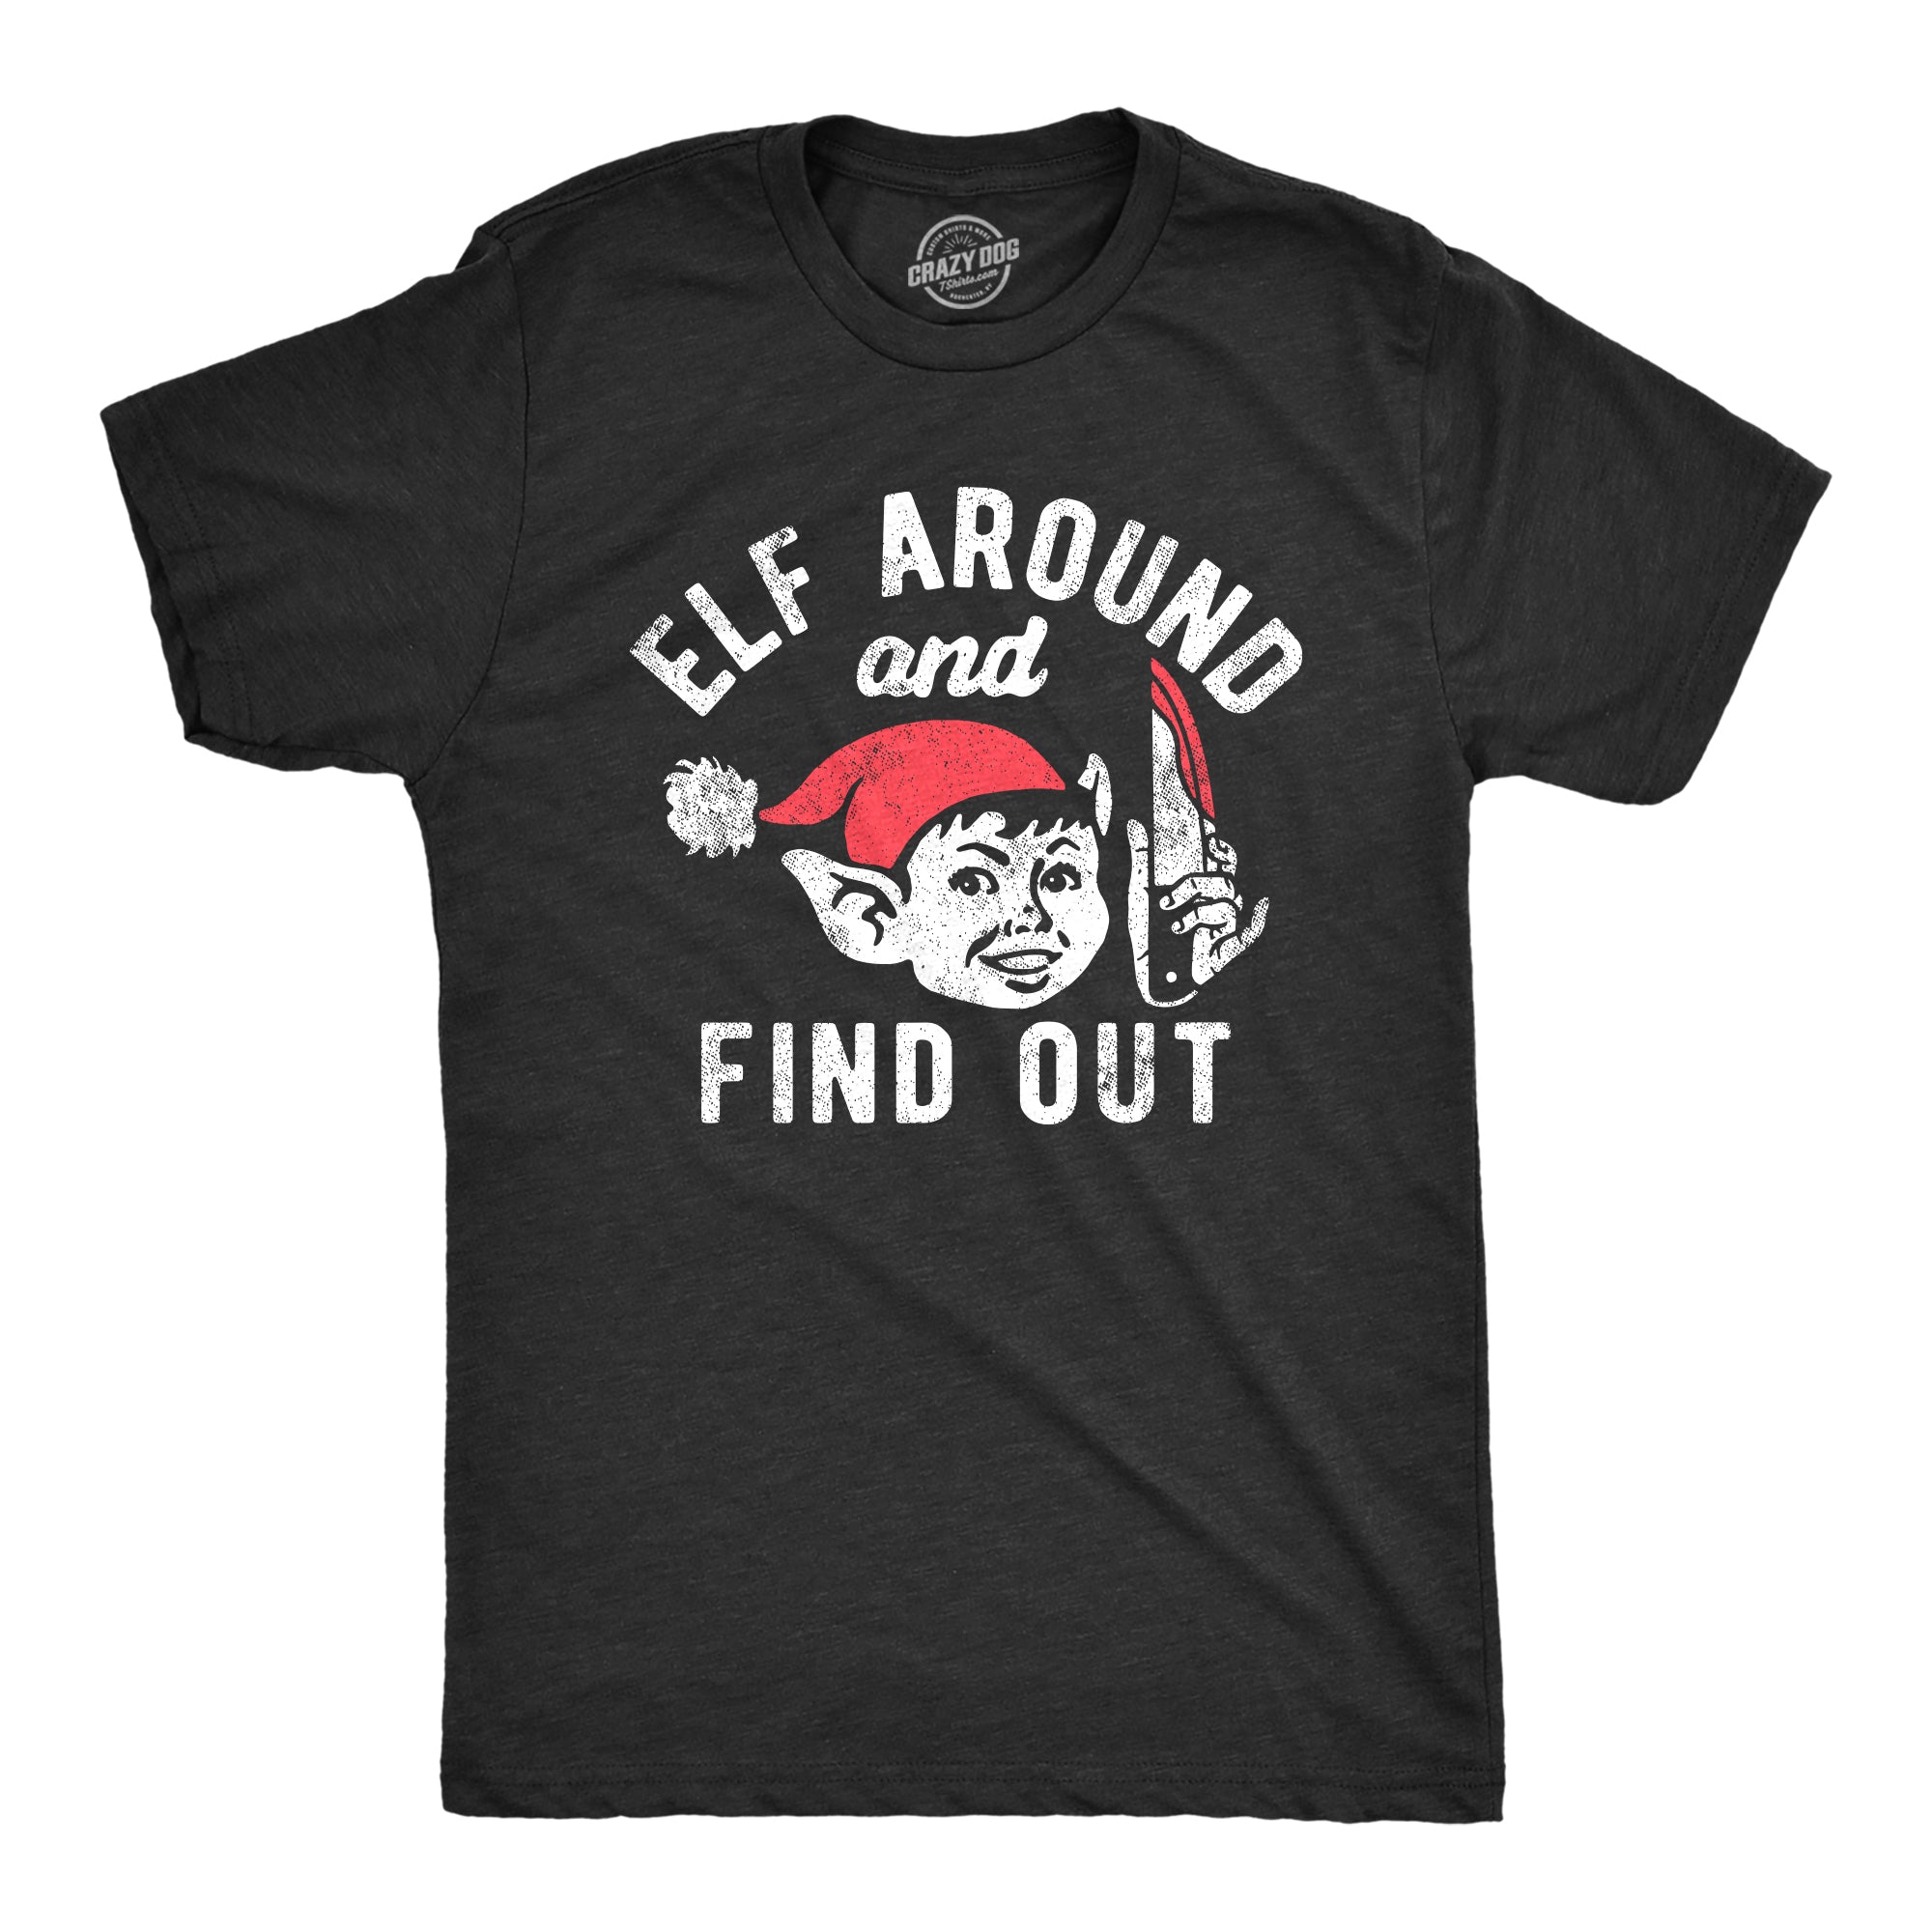 Funny Heather Black - ELF Elf Around And Find Out Mens T Shirt Nerdy Christmas Sarcastic Tee